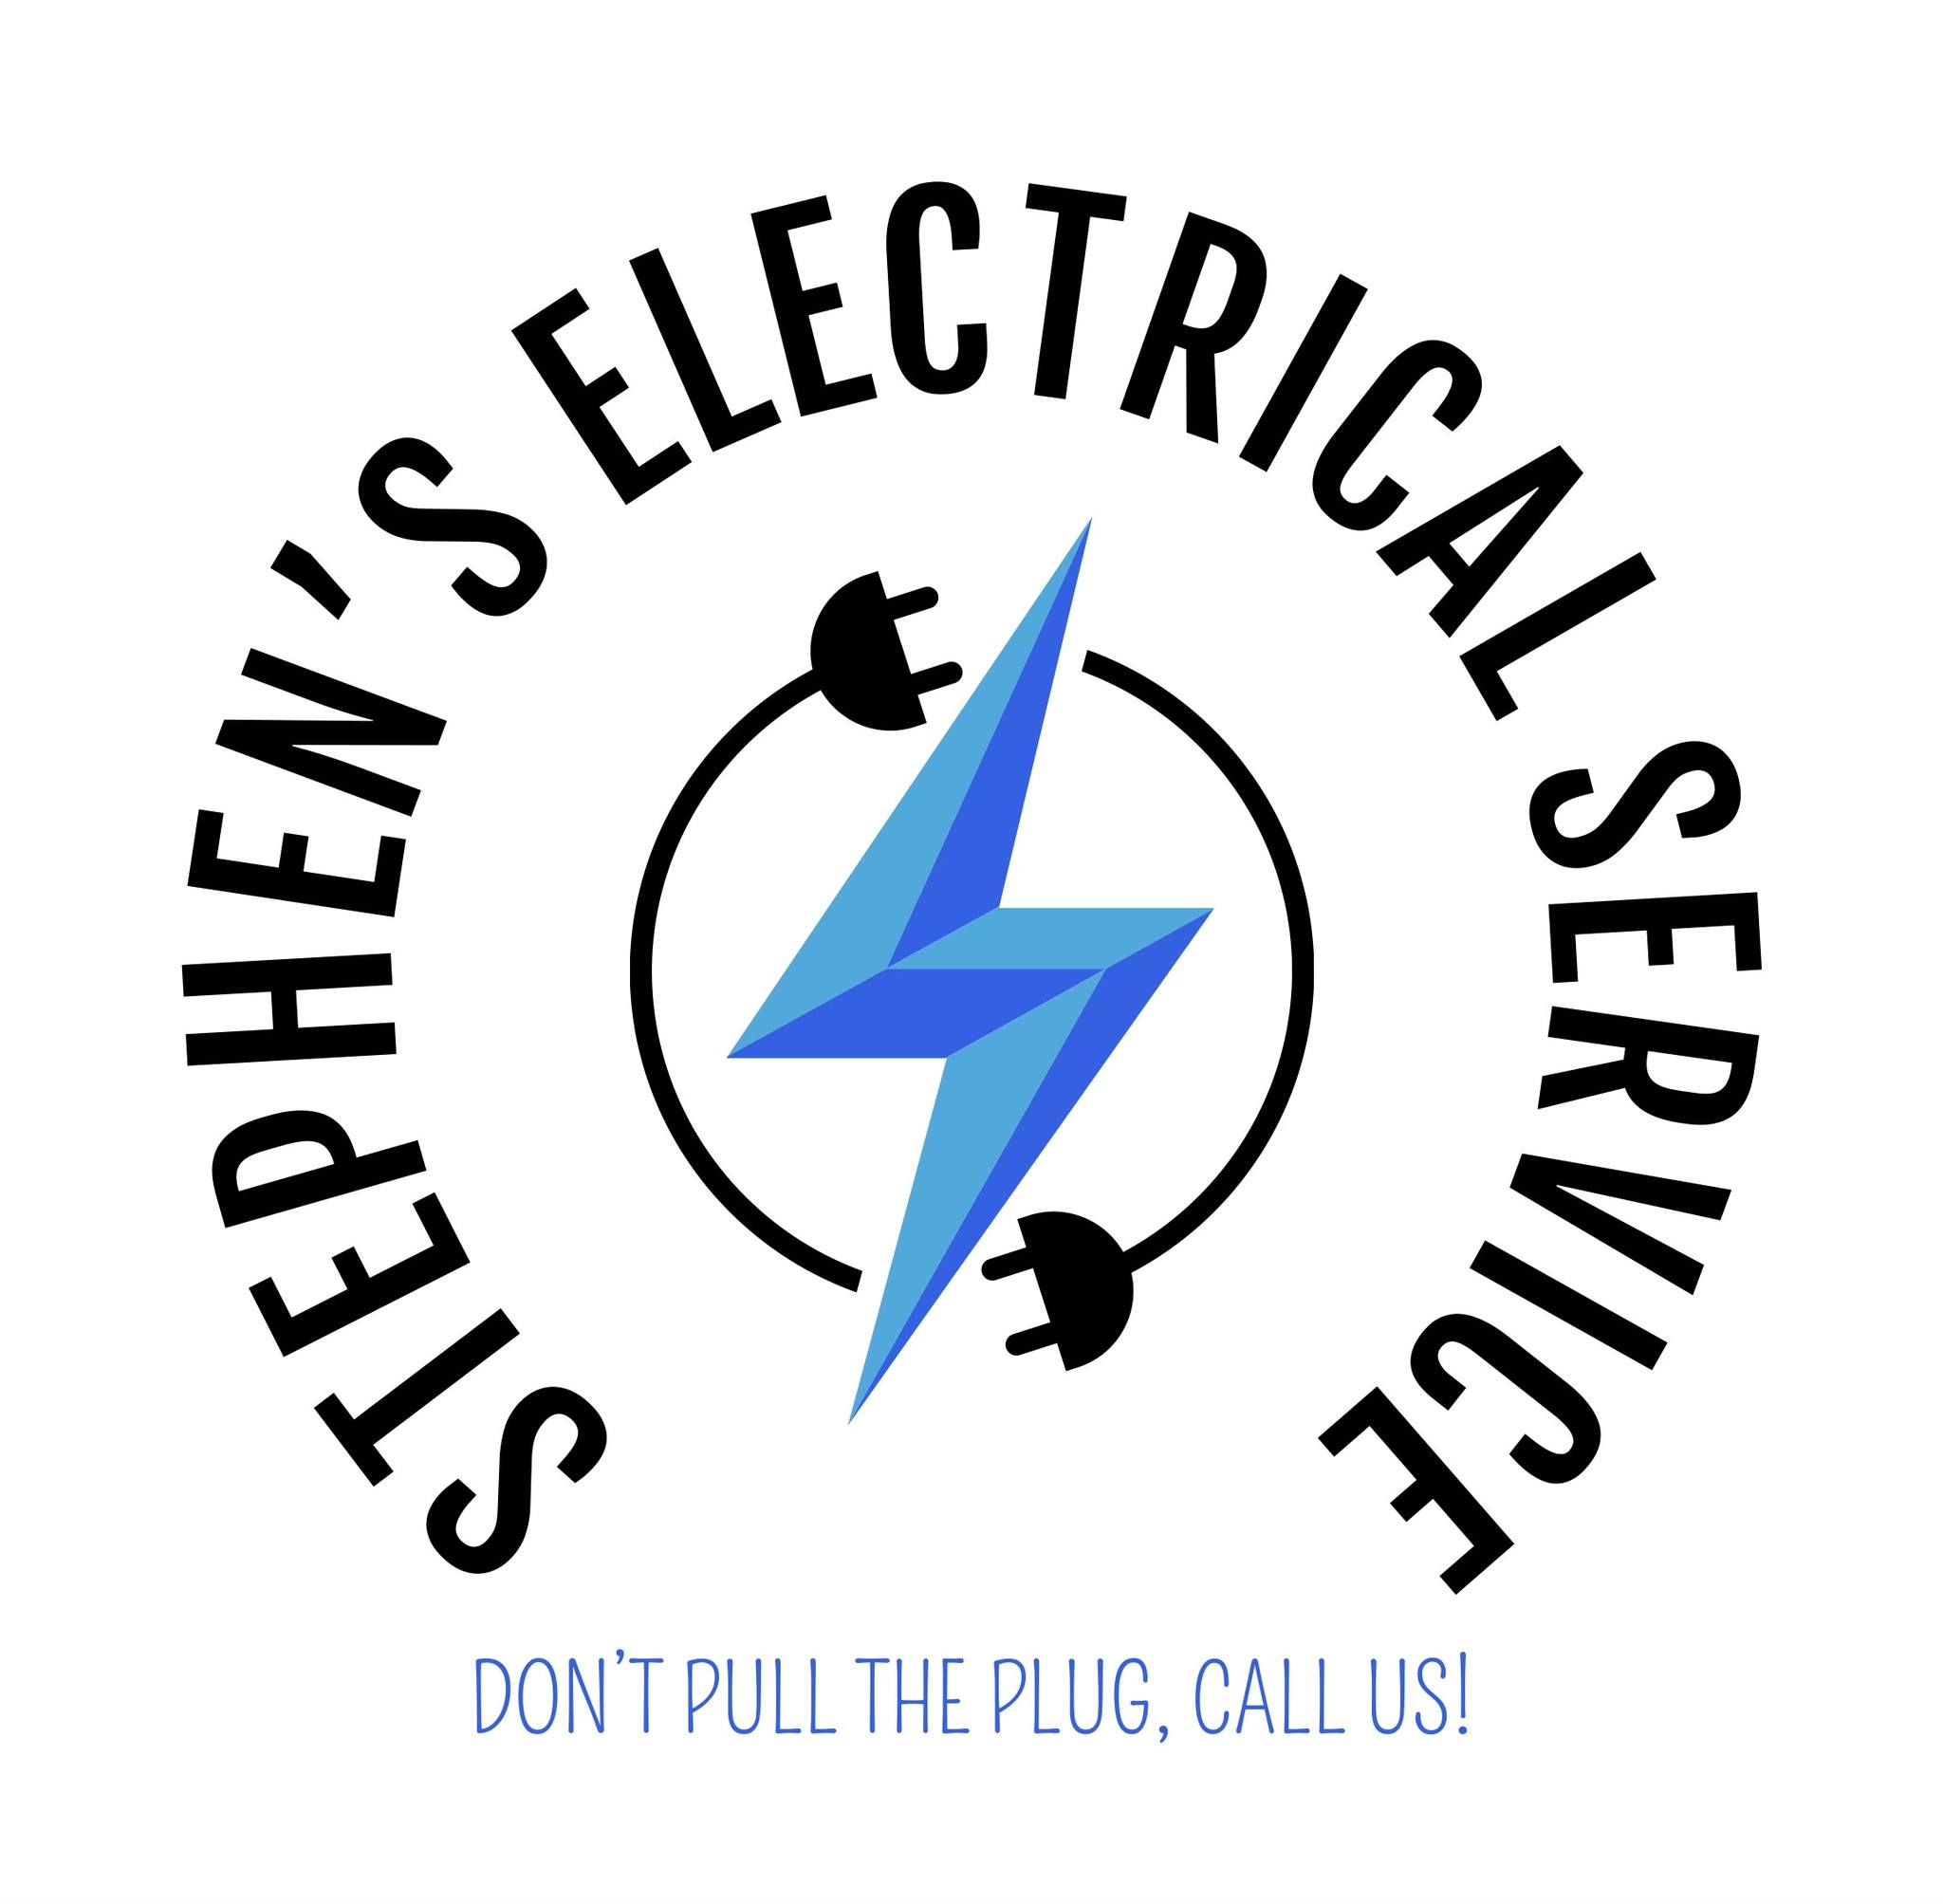 Stephen’s Electrical Services